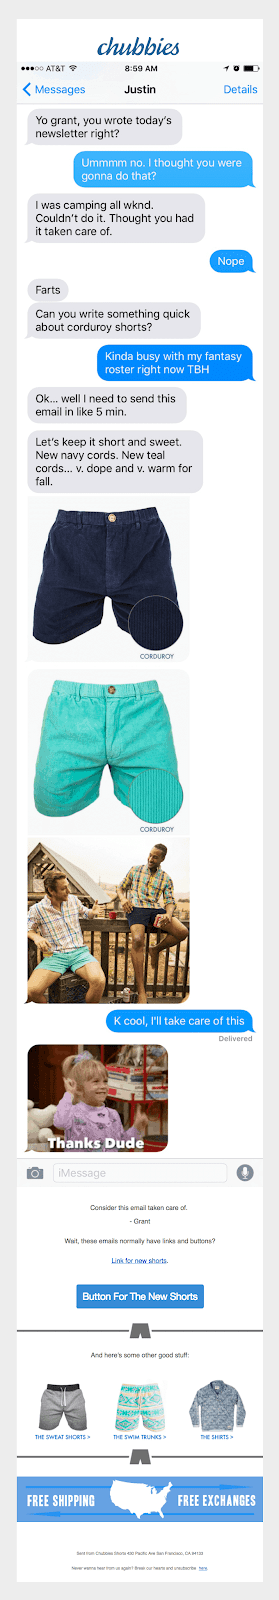 chubbies promotional email showing how to write a compelling sales email